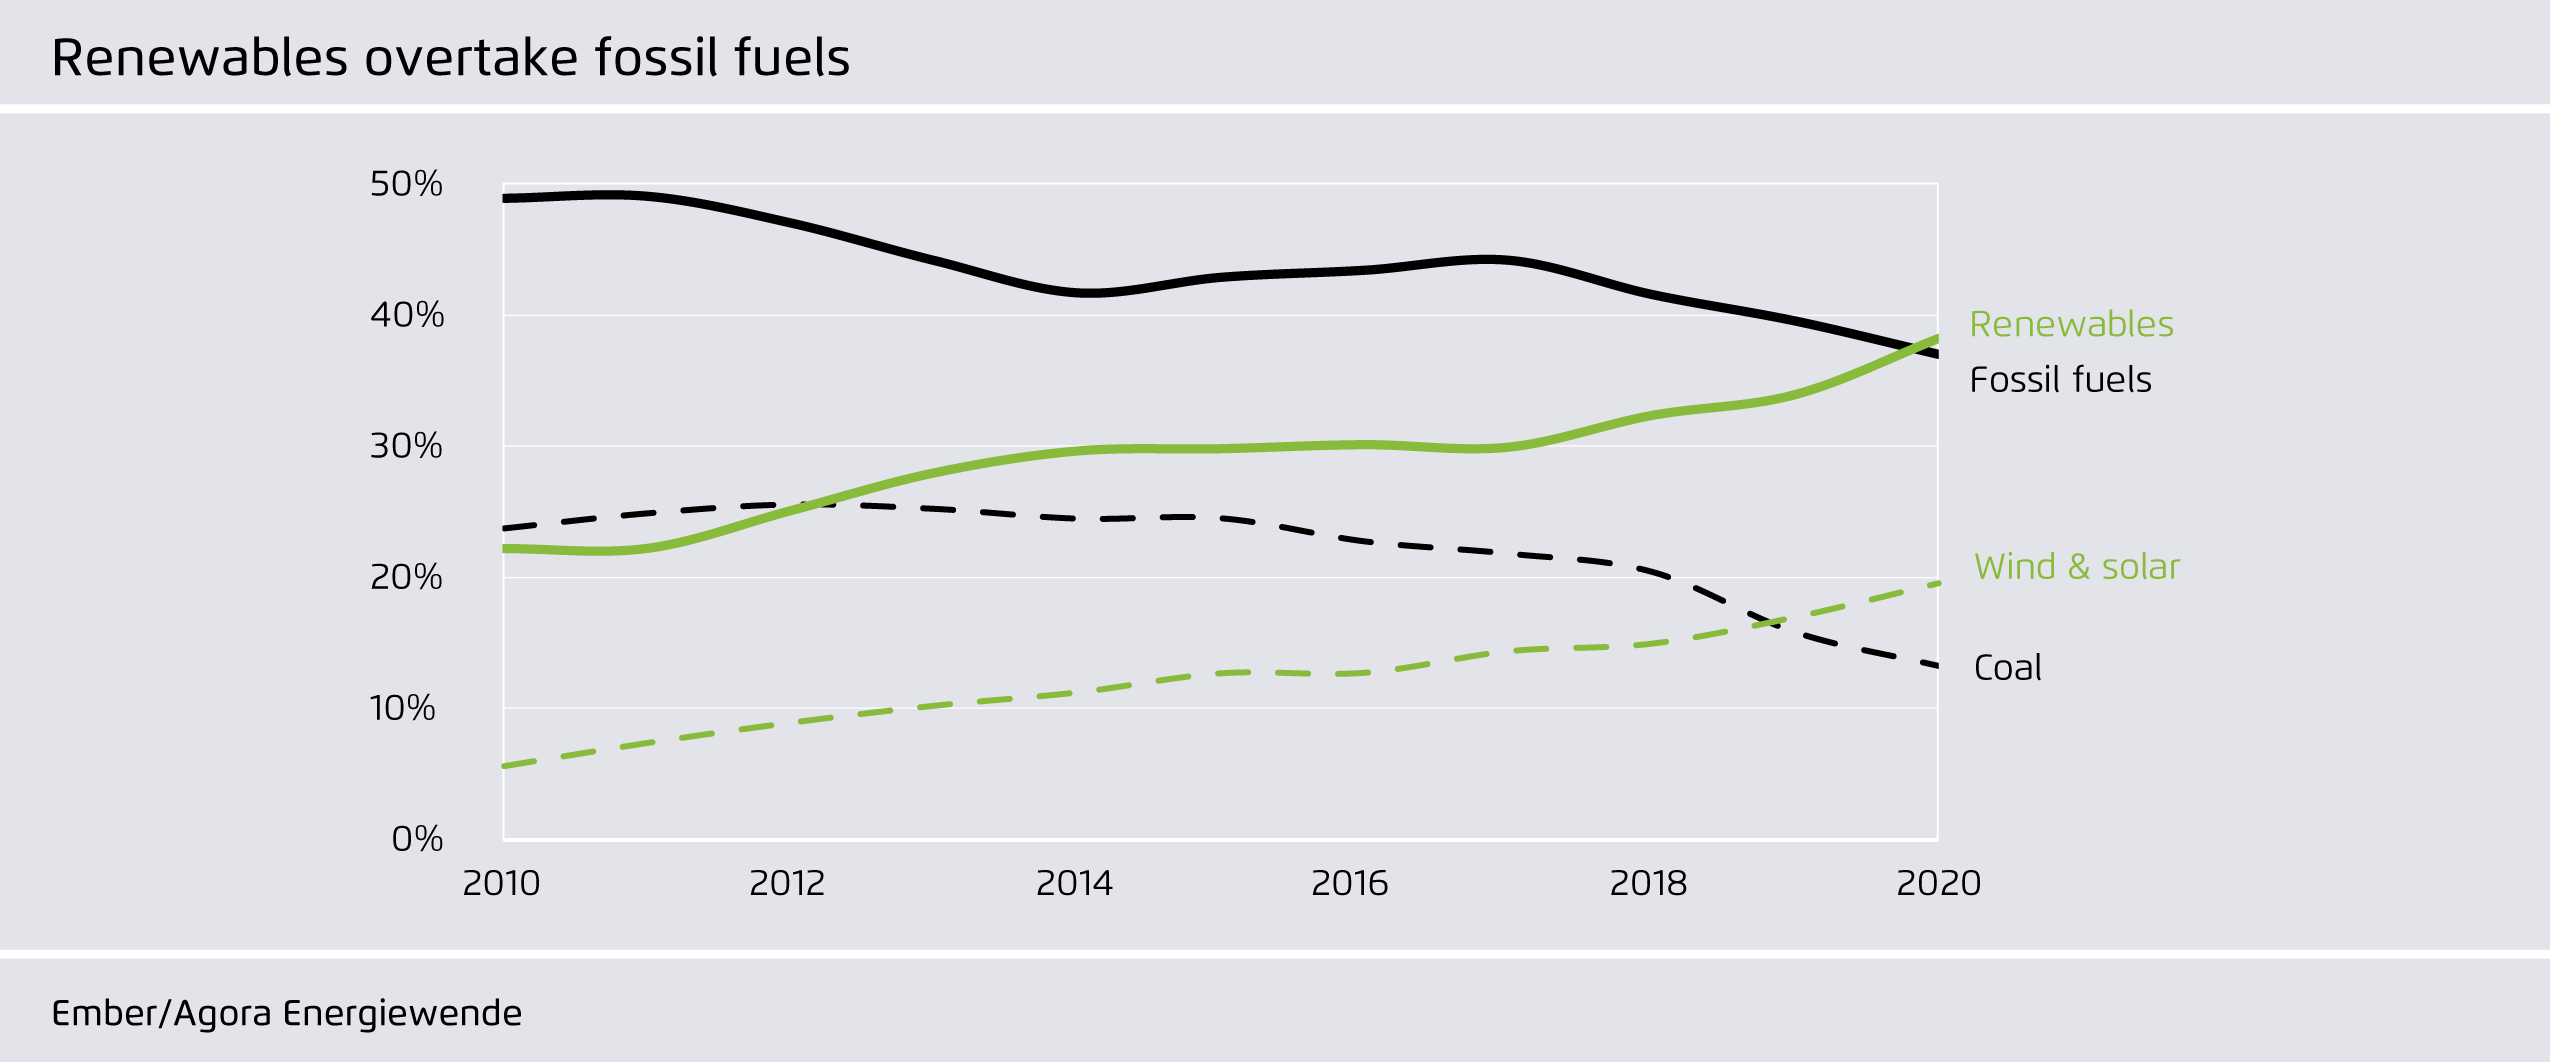 Preview for Renewables overtake fossil fuels